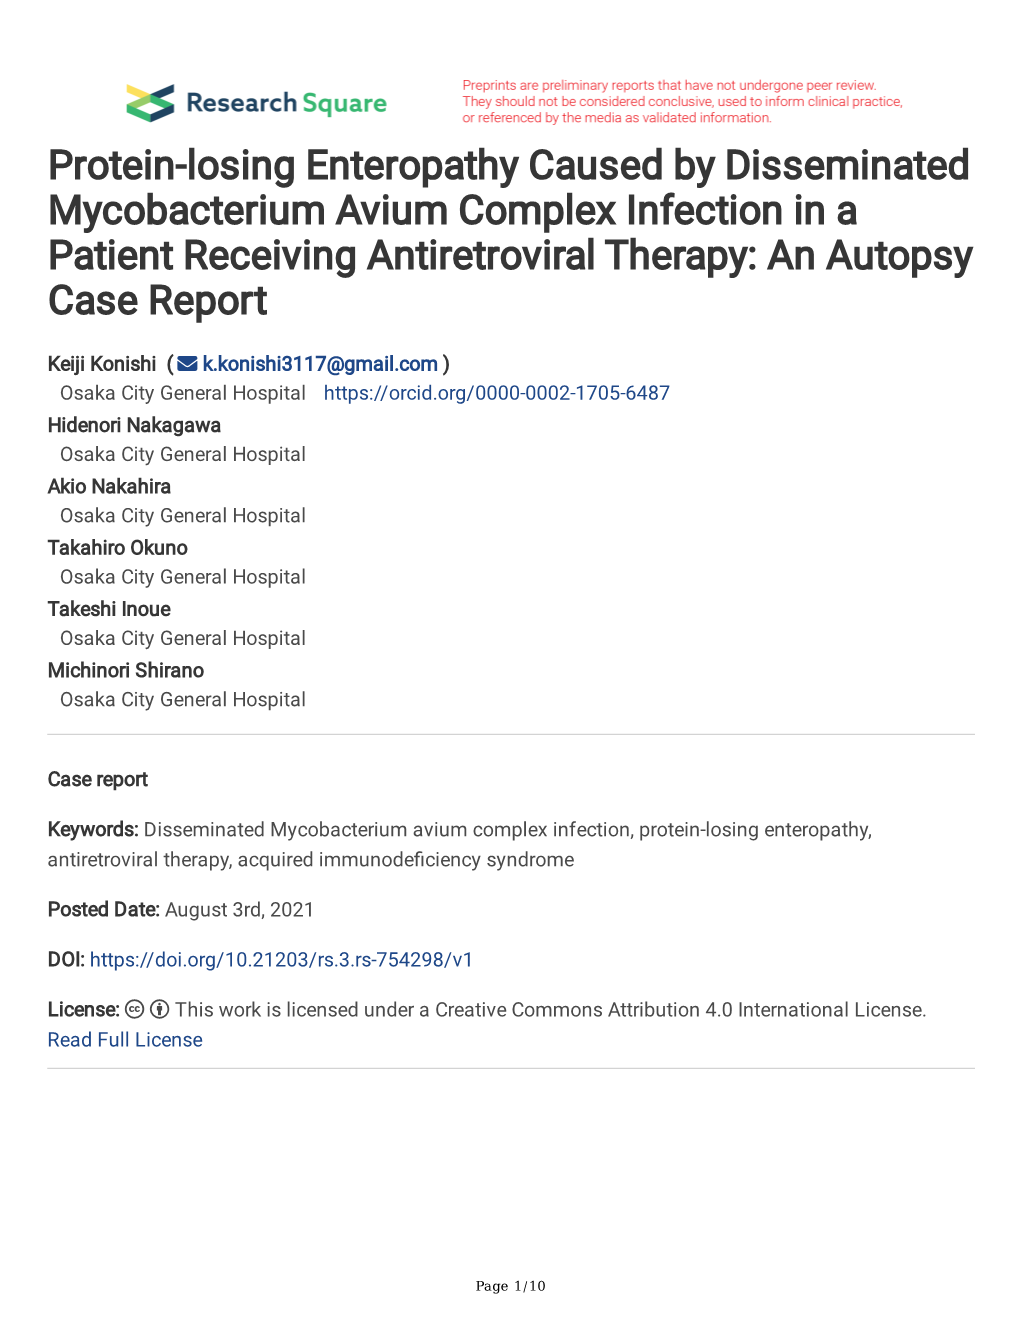 Protein-Losing Enteropathy Caused by Disseminated Mycobacterium Avium Complex Infection in a Patient Receiving Antiretroviral Therapy: an Autopsy Case Report